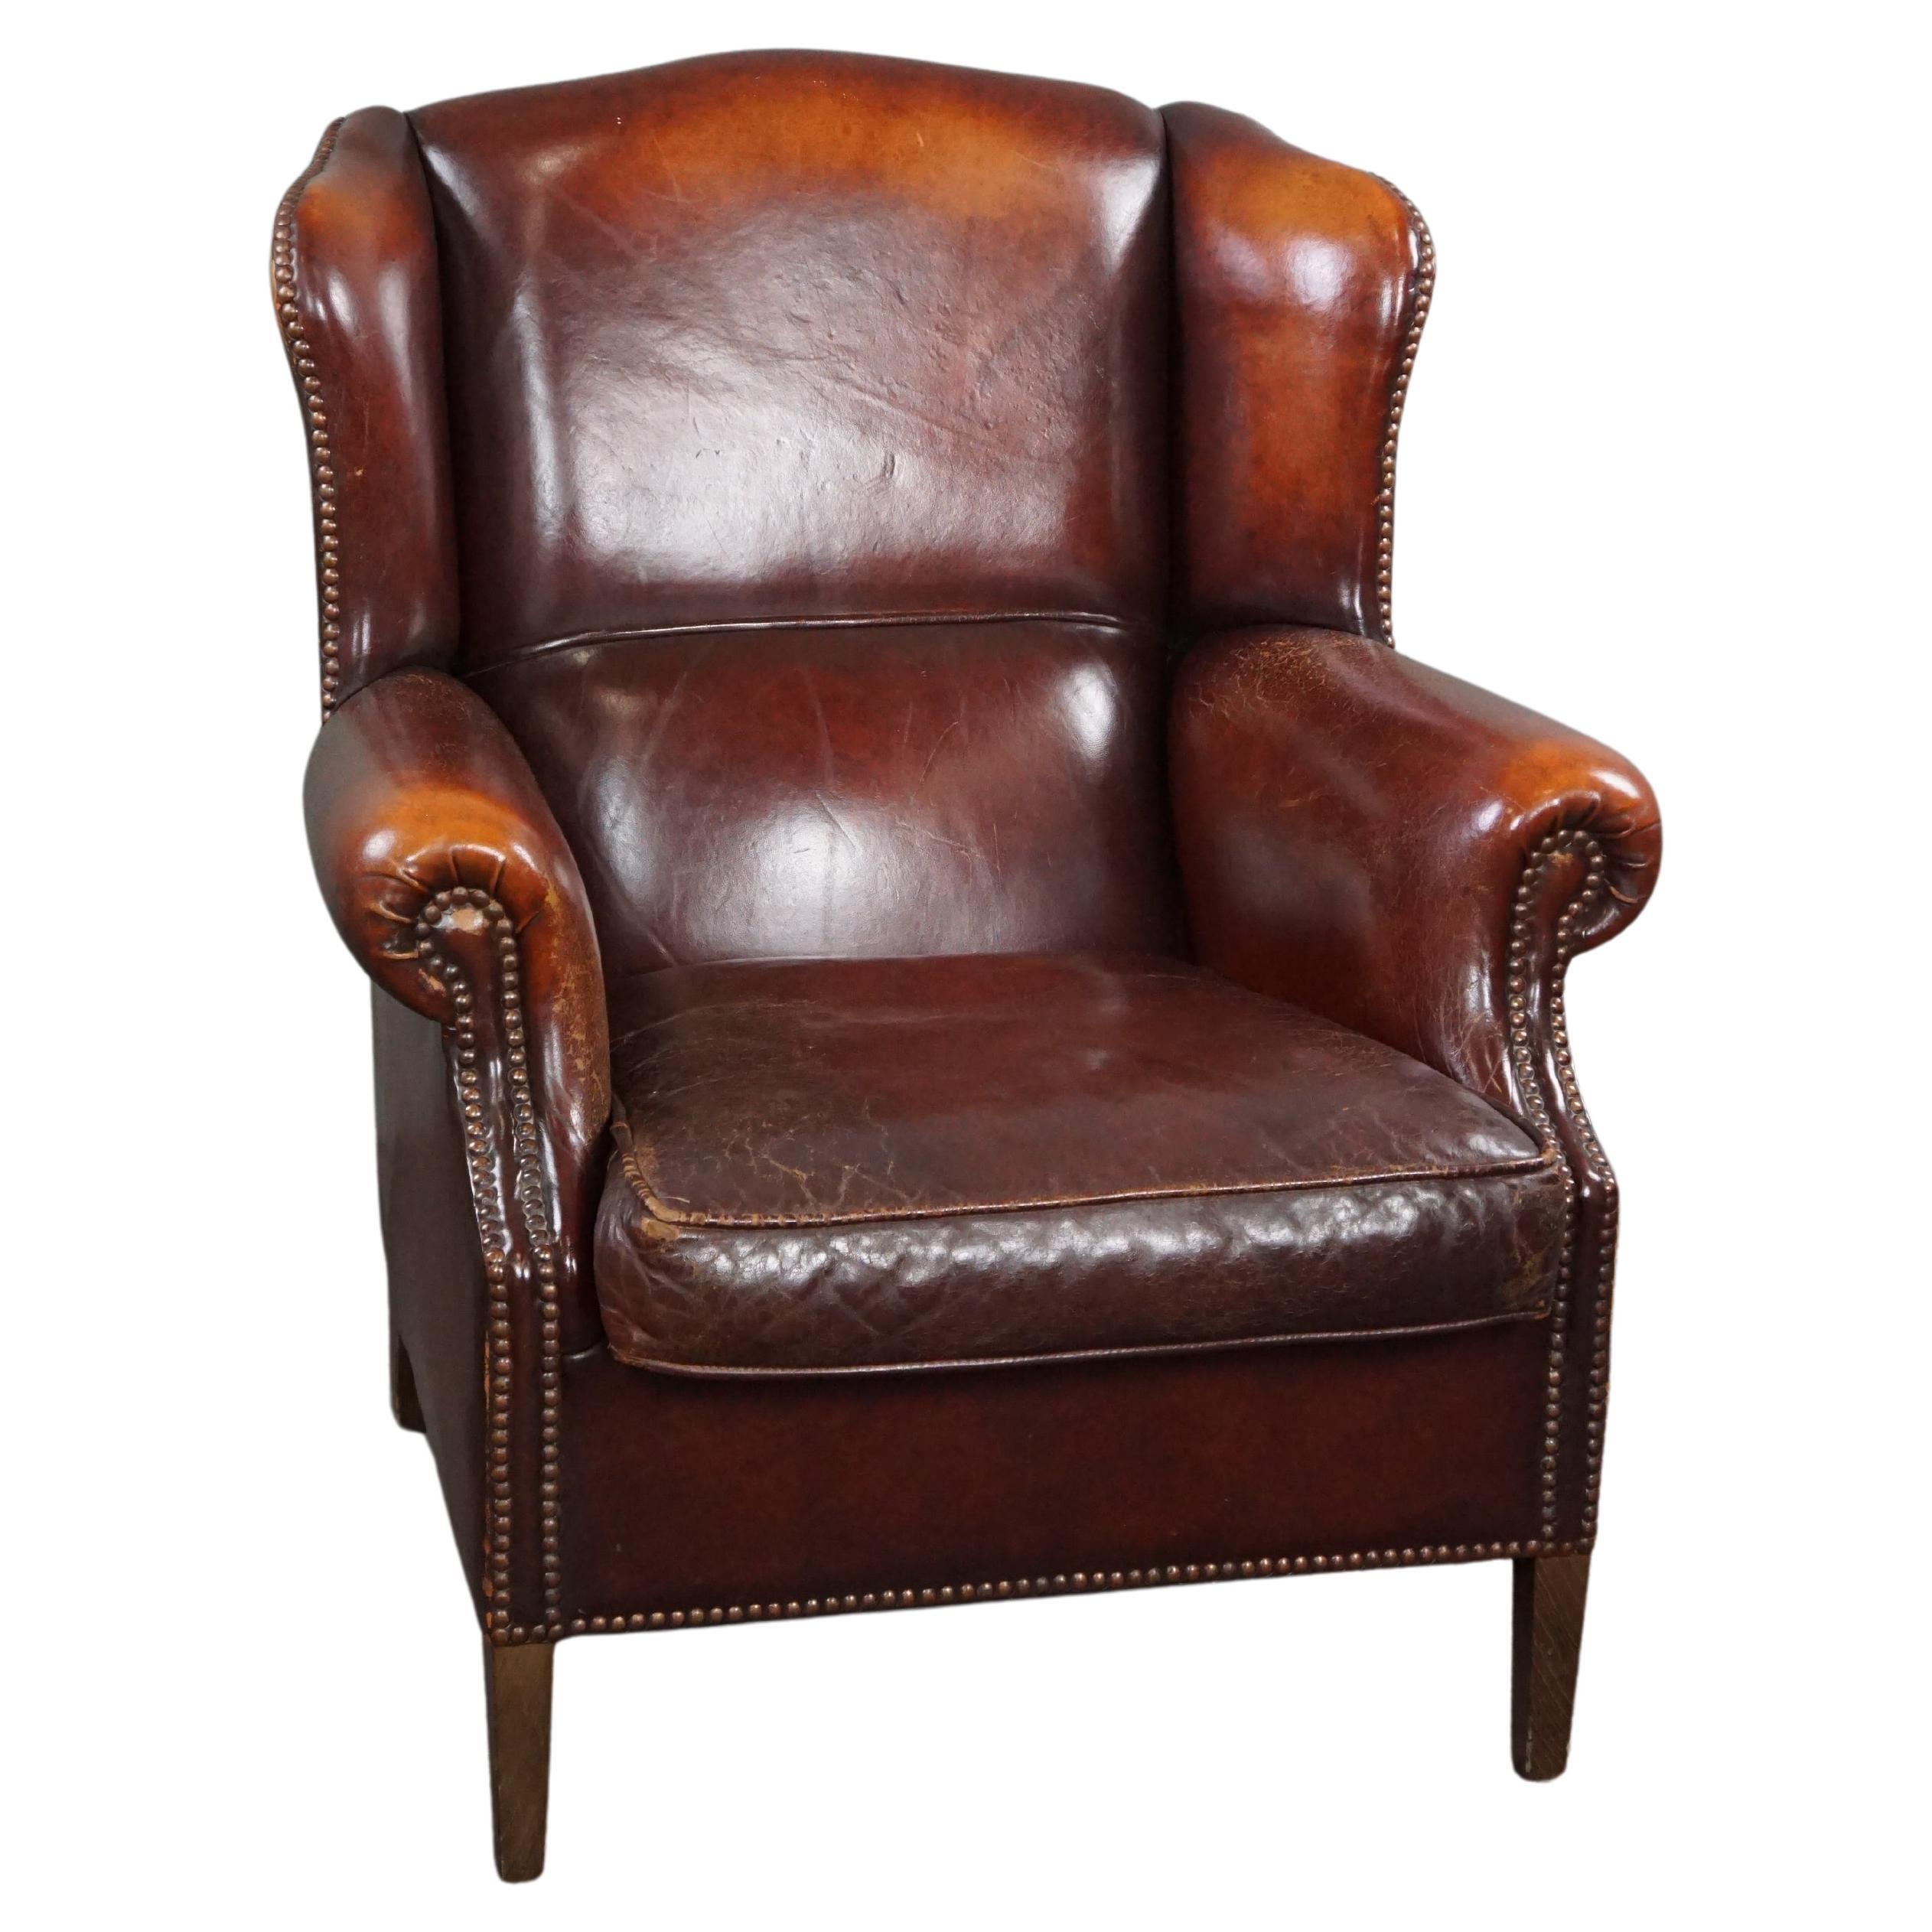 Warm brown sheep leather wing chair with character